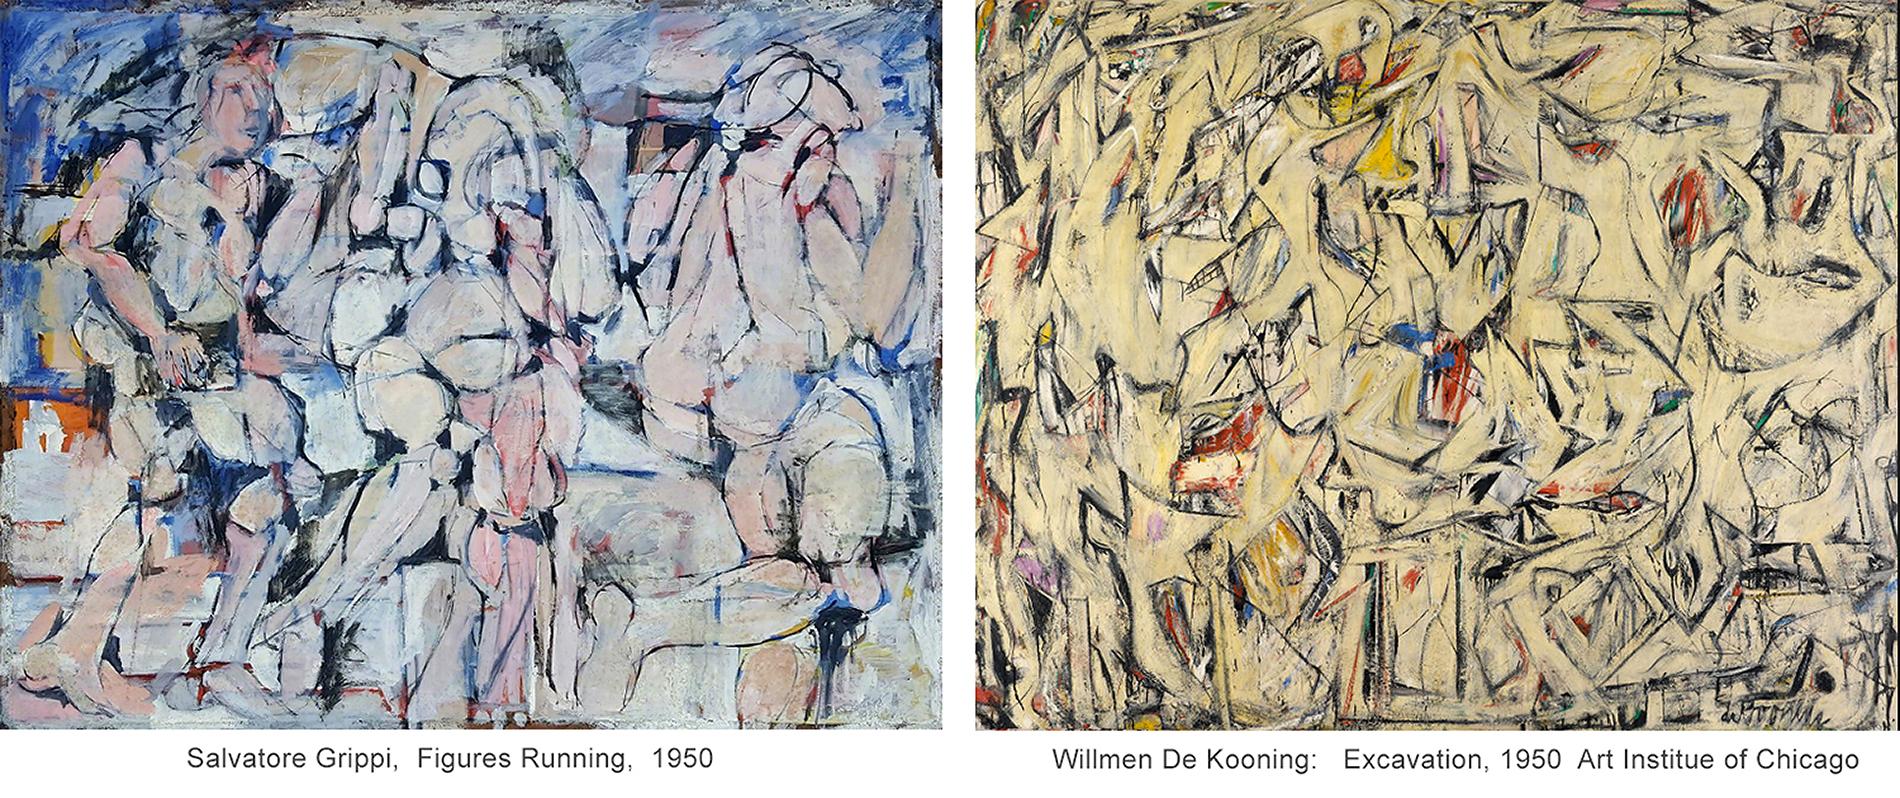 Salvatore Grippi was my art professor at Ithaca college from 1970- 1971
Who was doing paintings like this in 1950?  Jackson Pollack, Willem De Kooning and Salvatore Grippi, and a few others. Grippi was on the landing crew a Normandy Beach WWII and